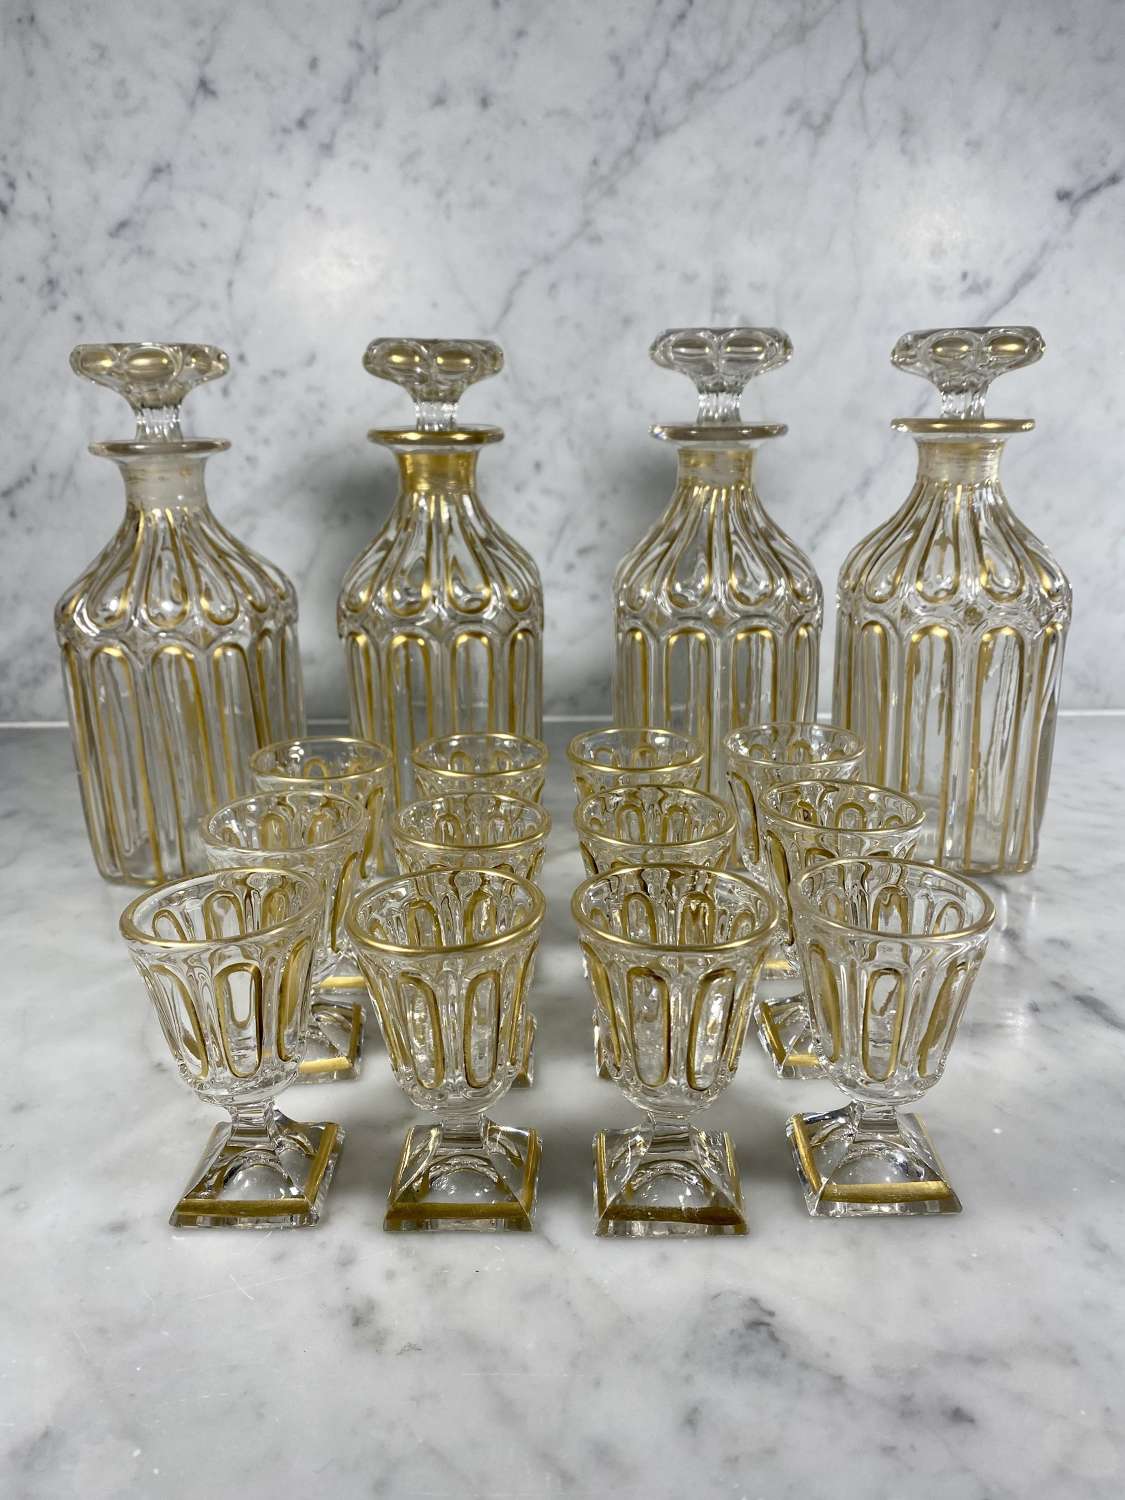 19th Century Baccarat gold liqueur decanter and glass set